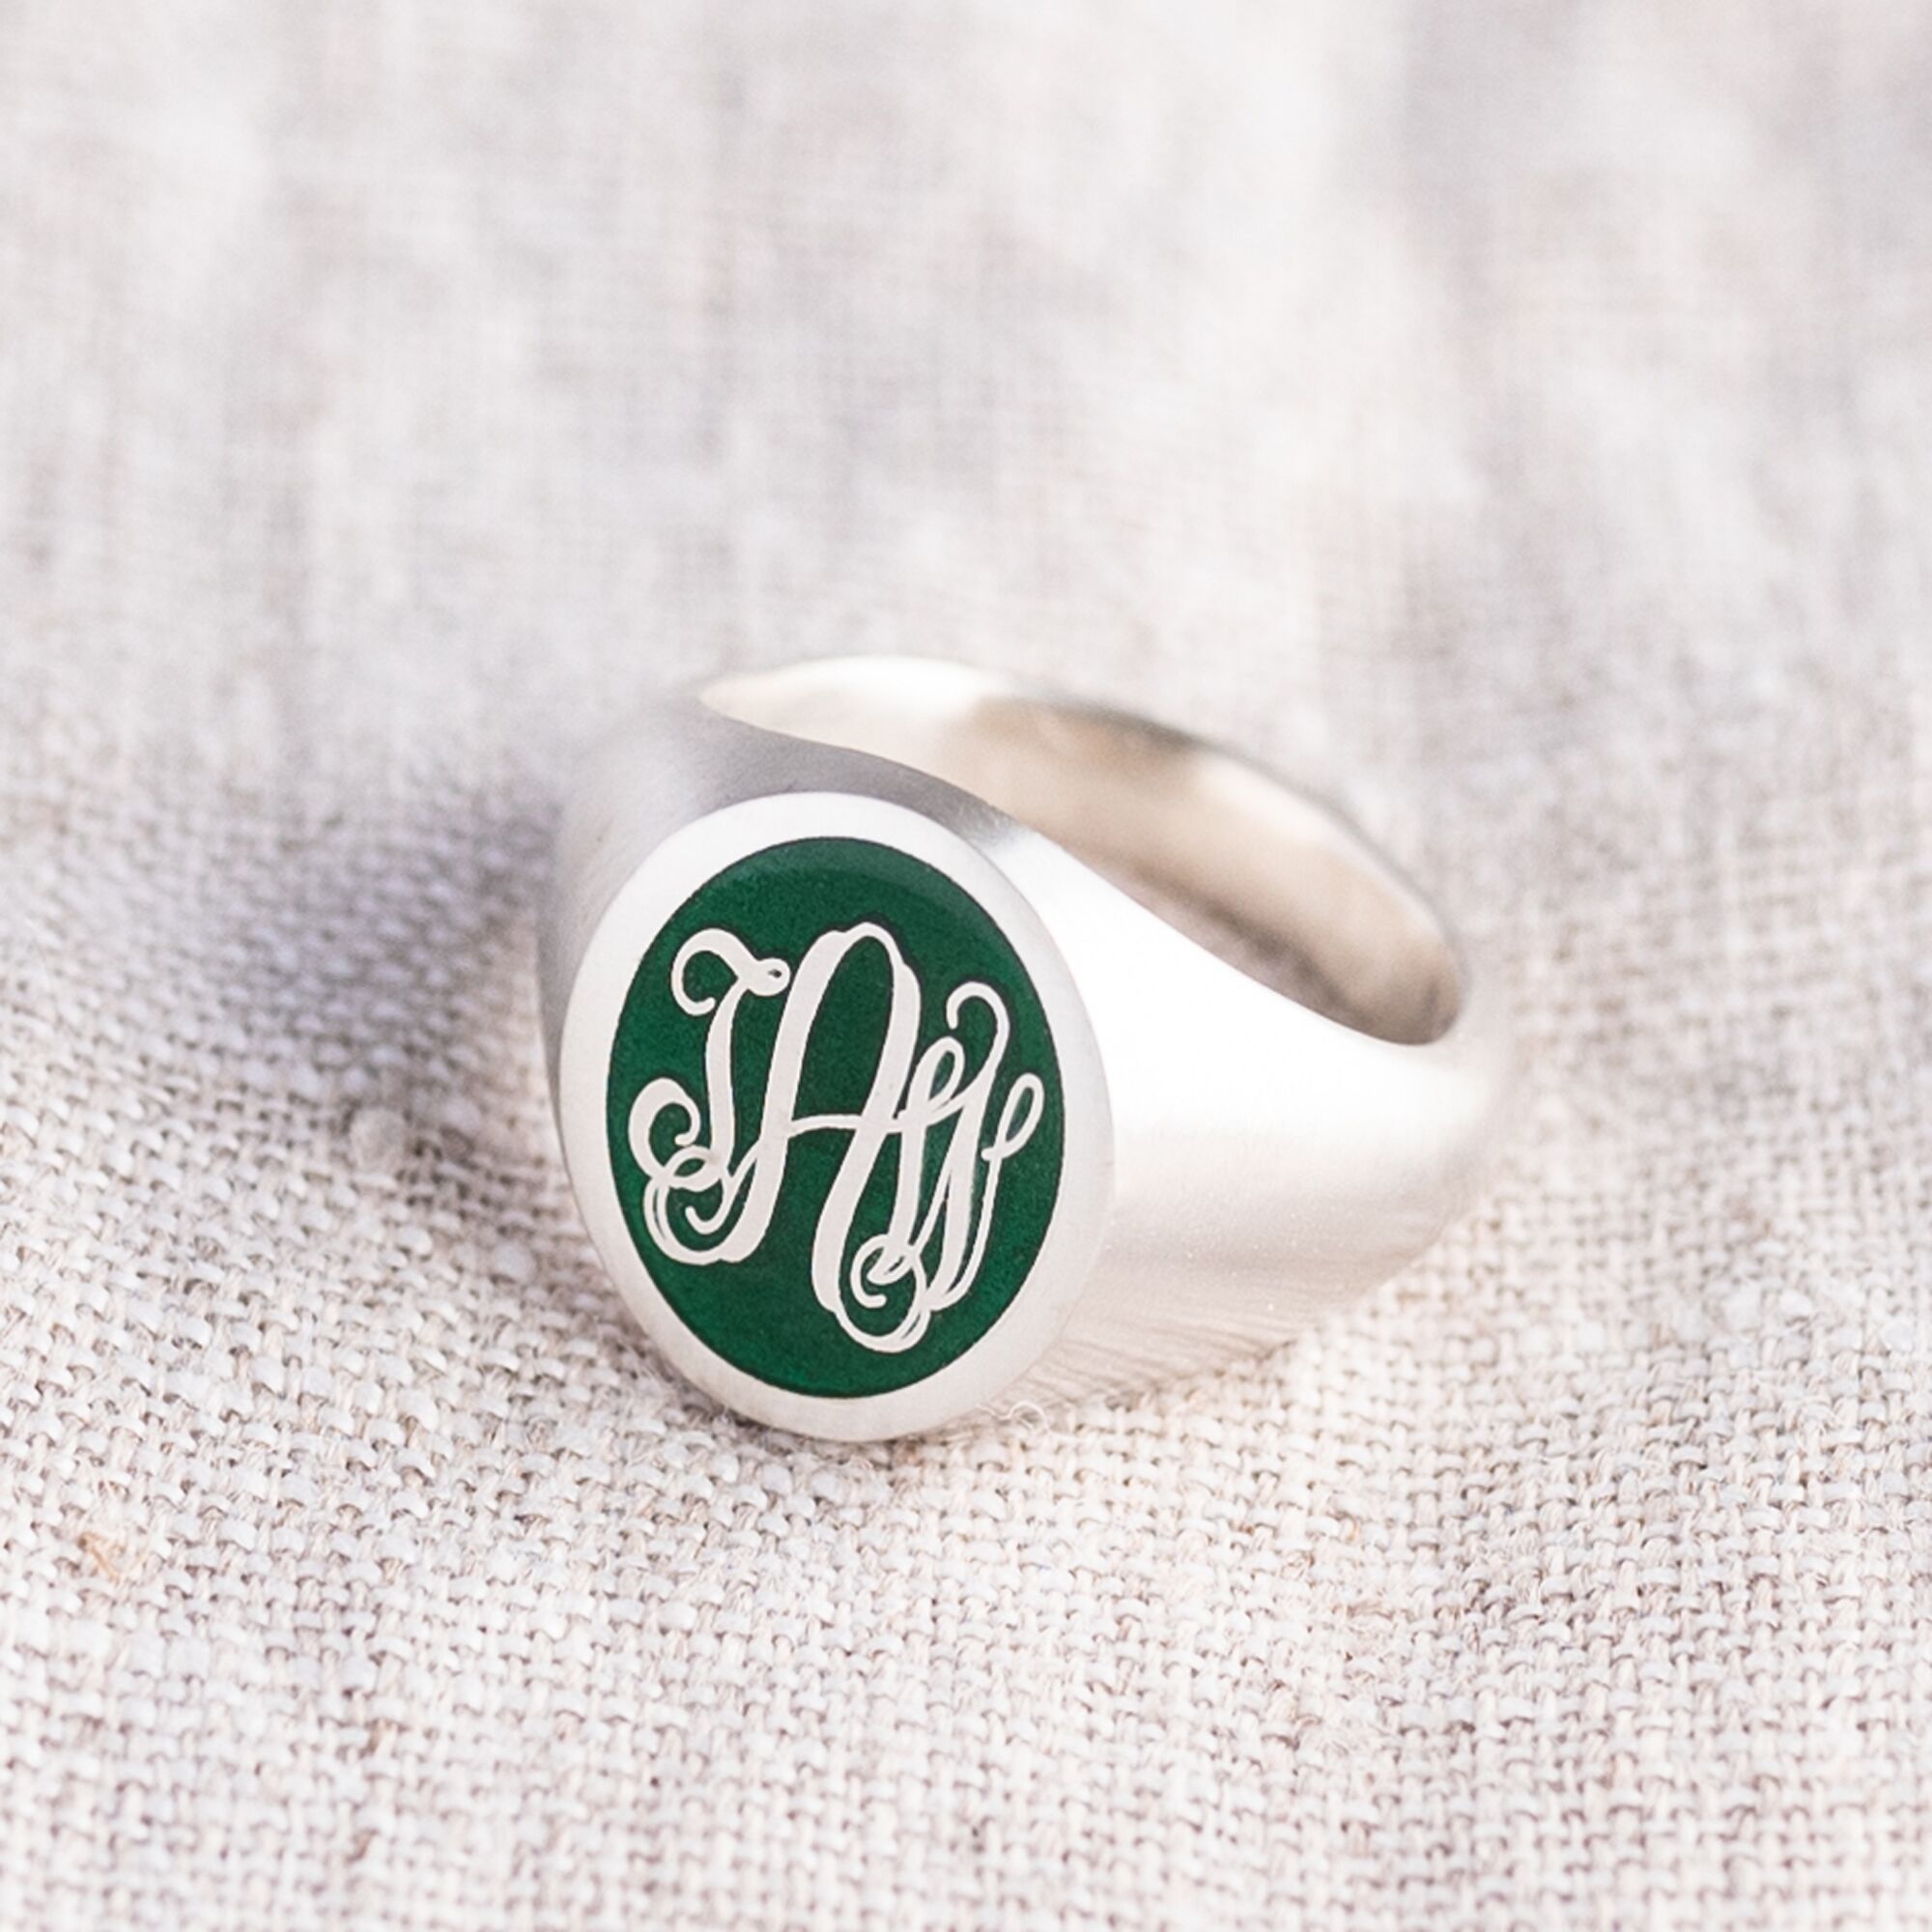 Signet Ring in Gold Plating with Engraved Monogram - Name My Jewelry ™